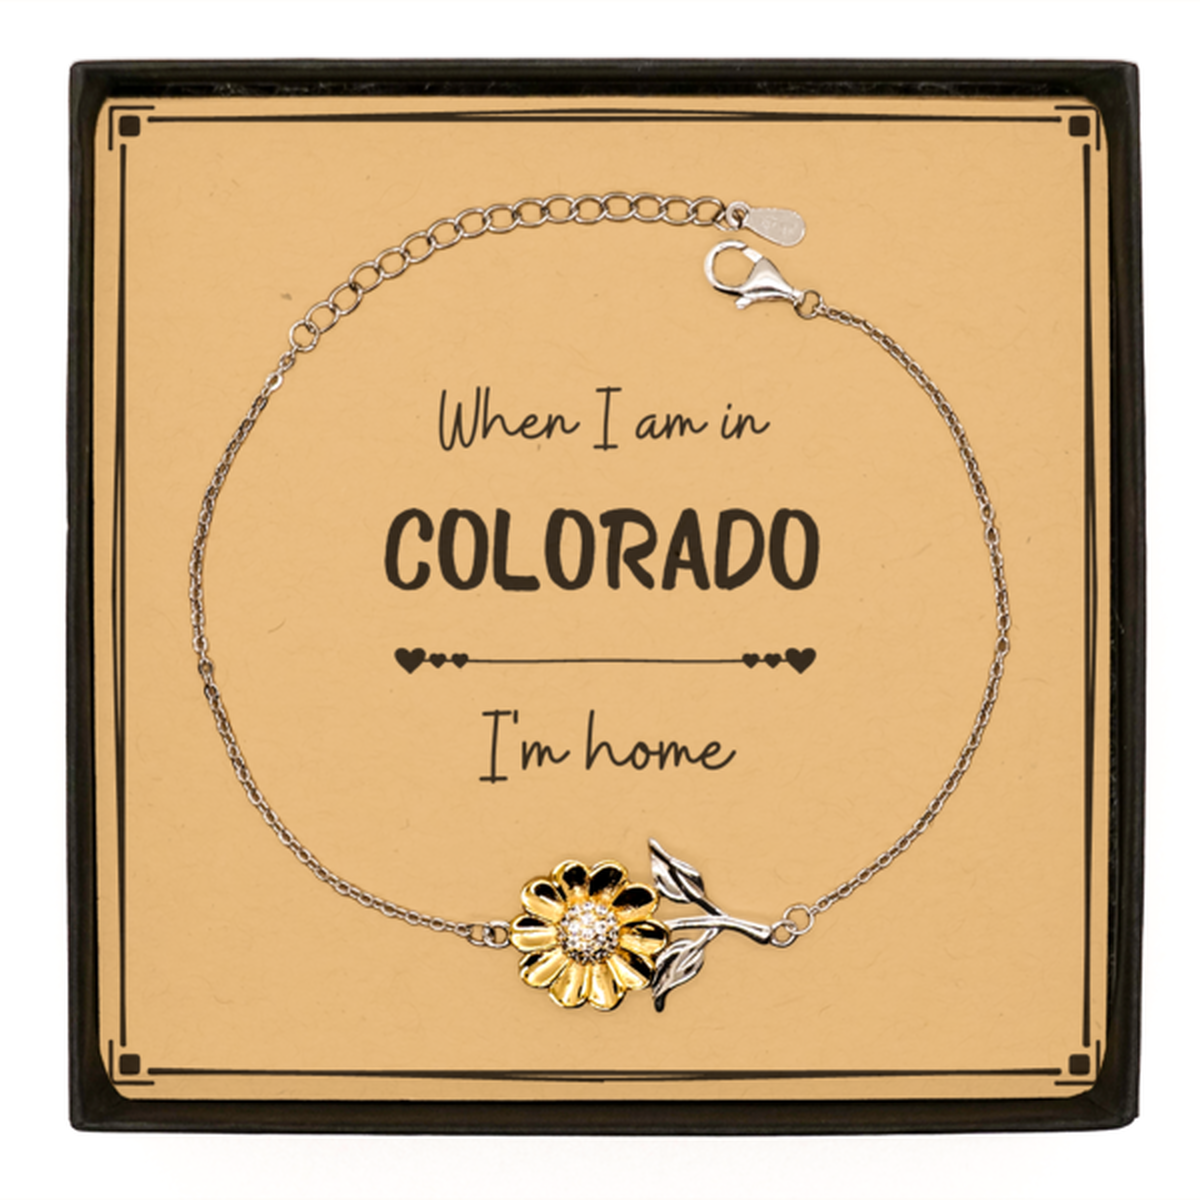 When I am in Colorado I'm home Sunflower Bracelet, Message Card Gifts For Colorado, State Colorado Birthday Gifts for Friends Coworker